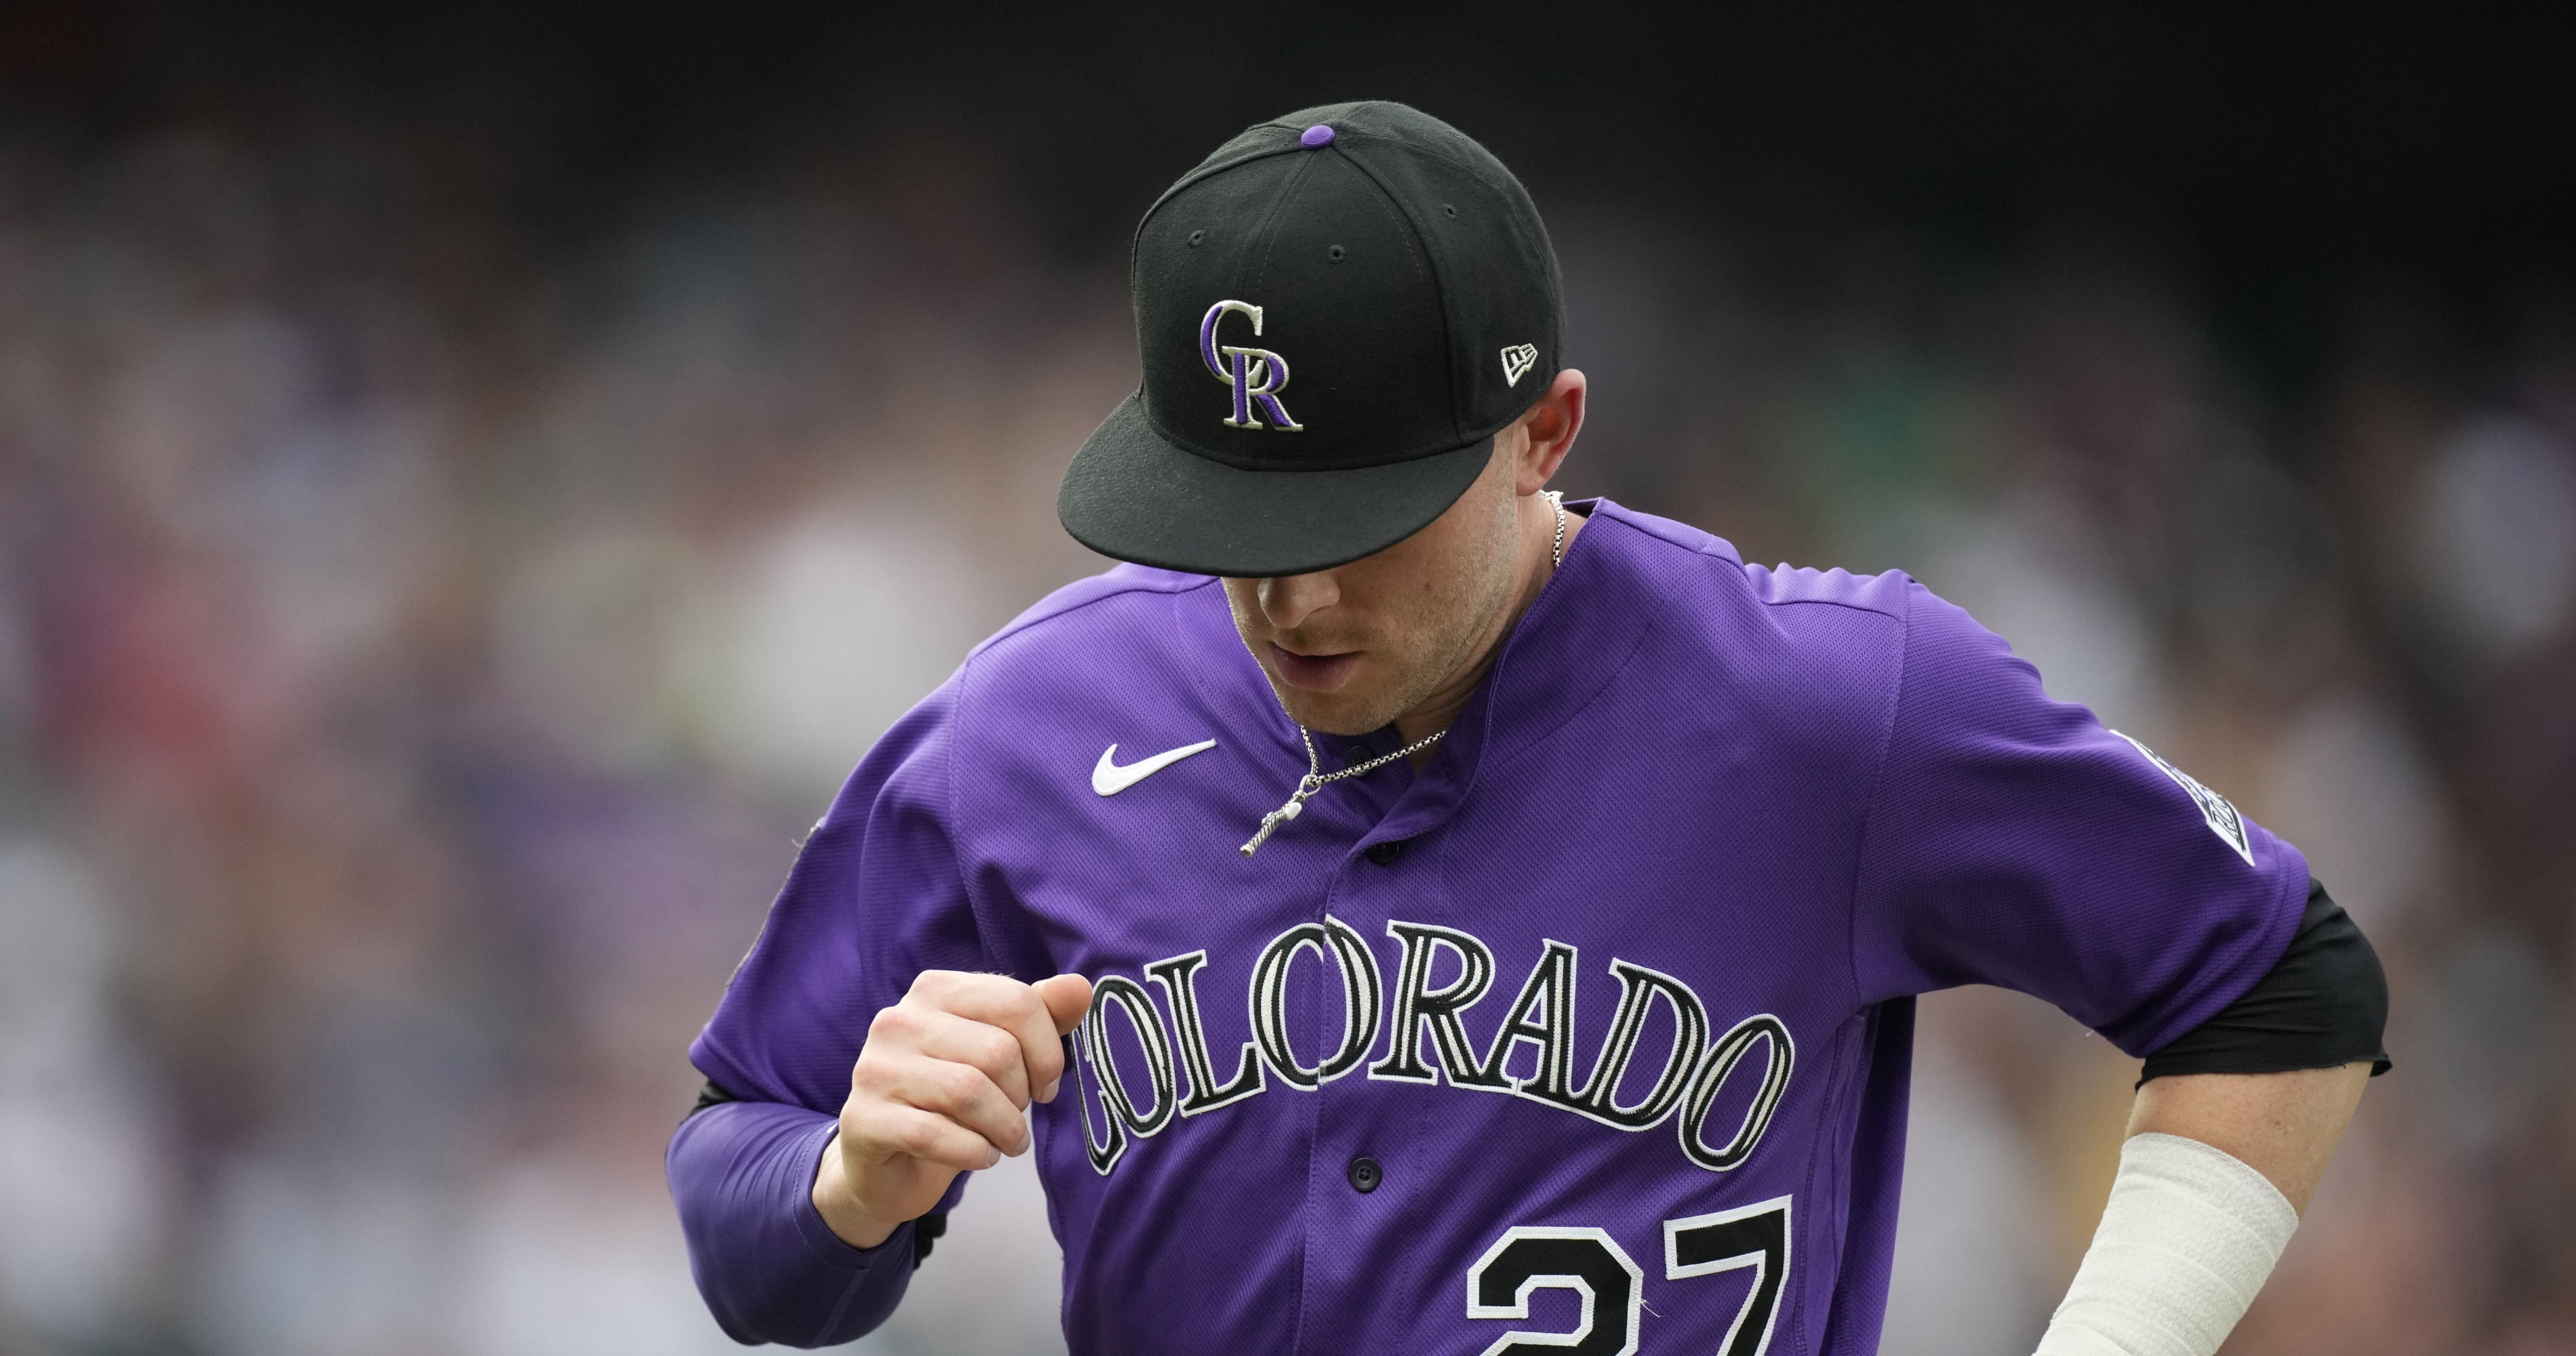 Yankees Trade Rumors: NYY Have Made Offer for Rockies' Trevor